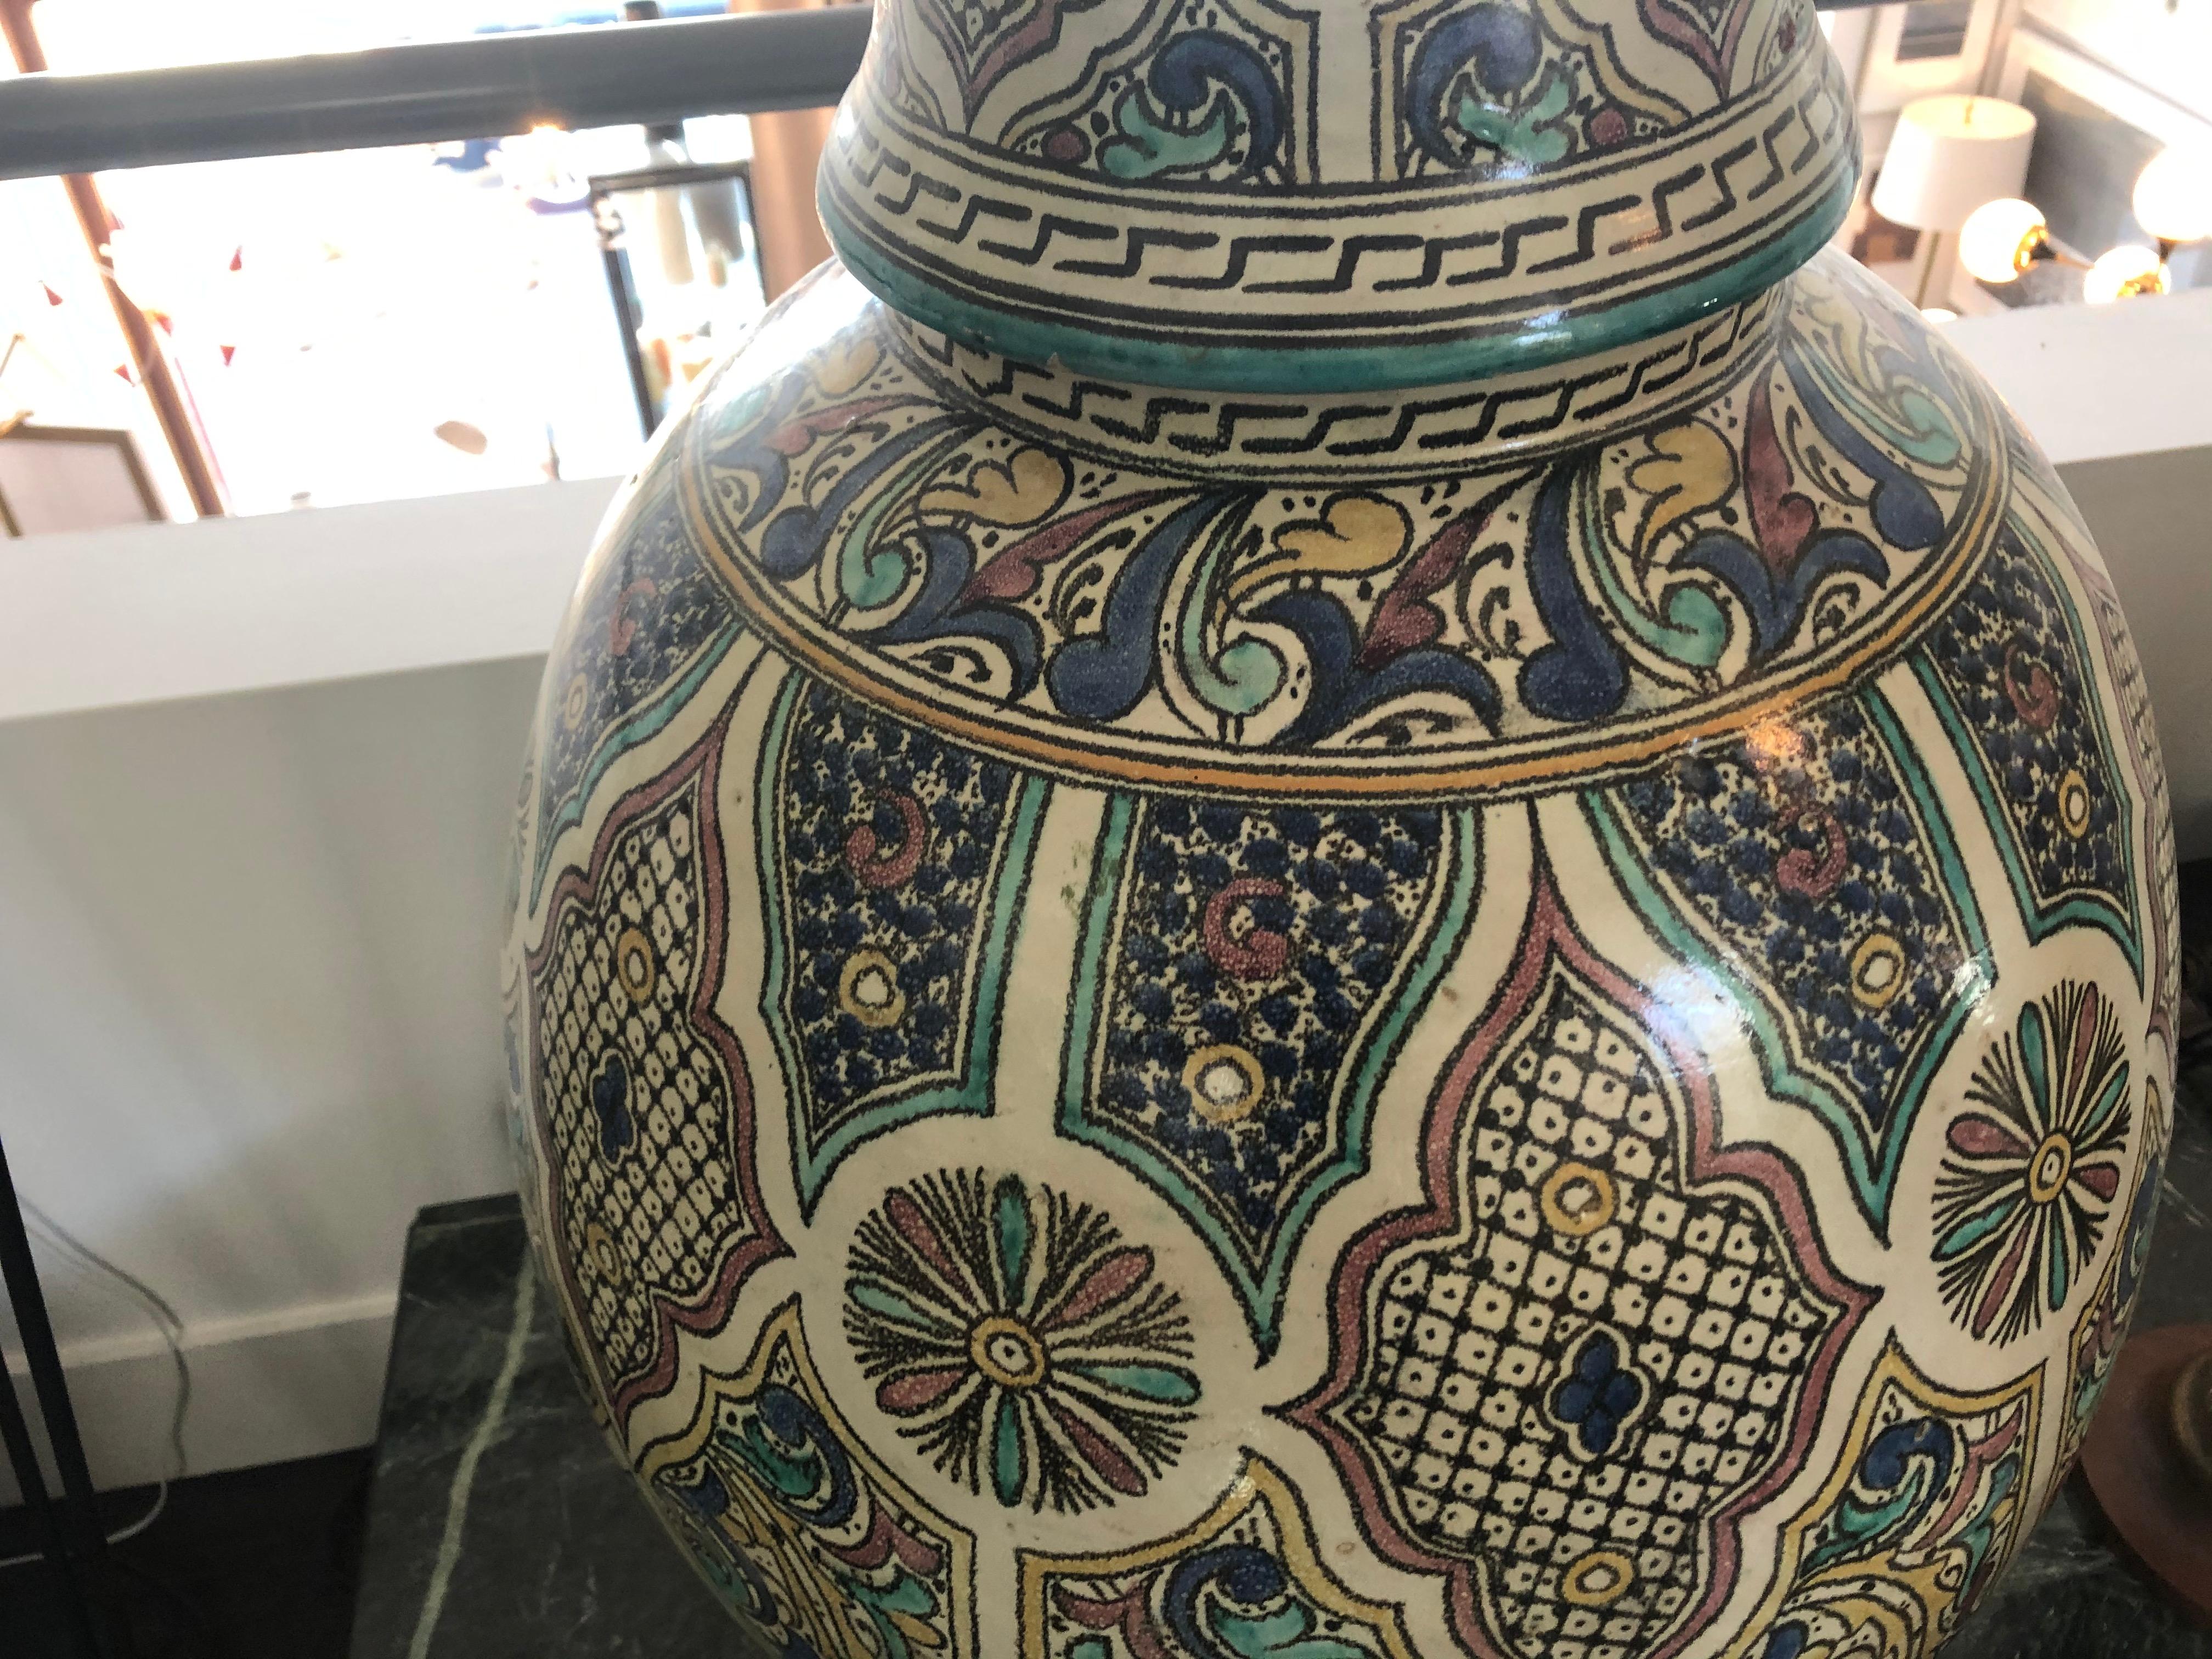 Vintage Giant Moroccan jar with colorful classic Moroccan design motifs.